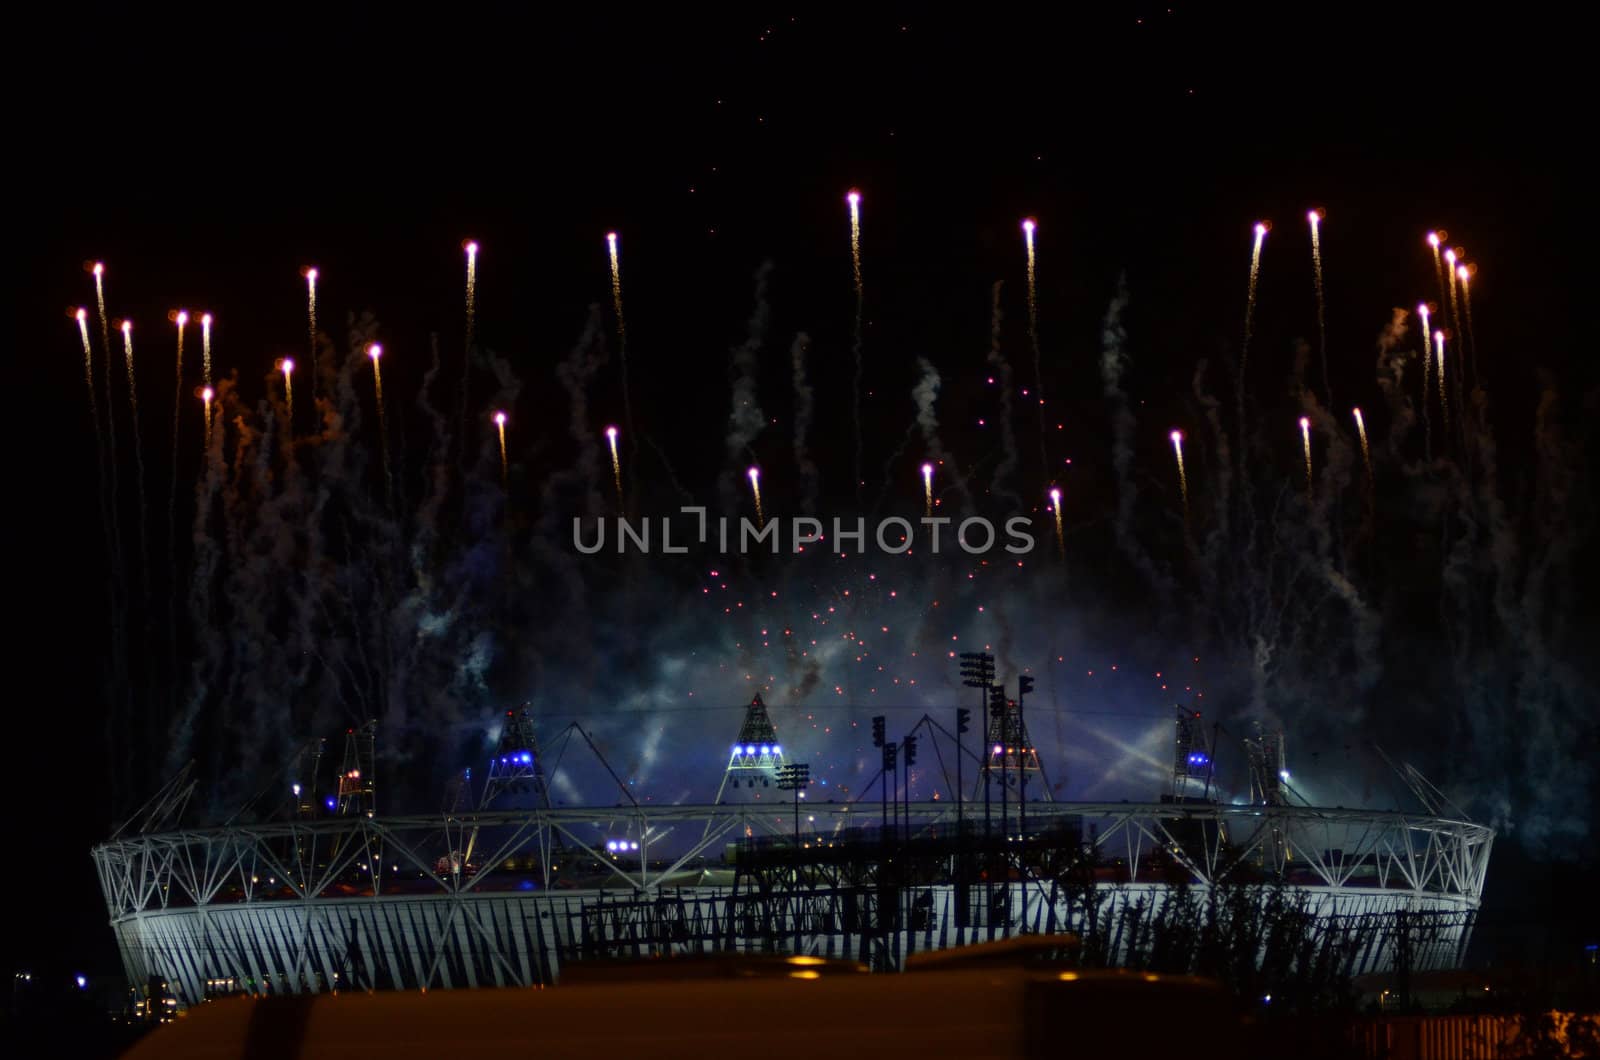 London � August 12: Fireworks over the Olympic Stadium to mark the closing ceremony of the 2012 Olympic Games In London  August 12th, 2012 in London, England.